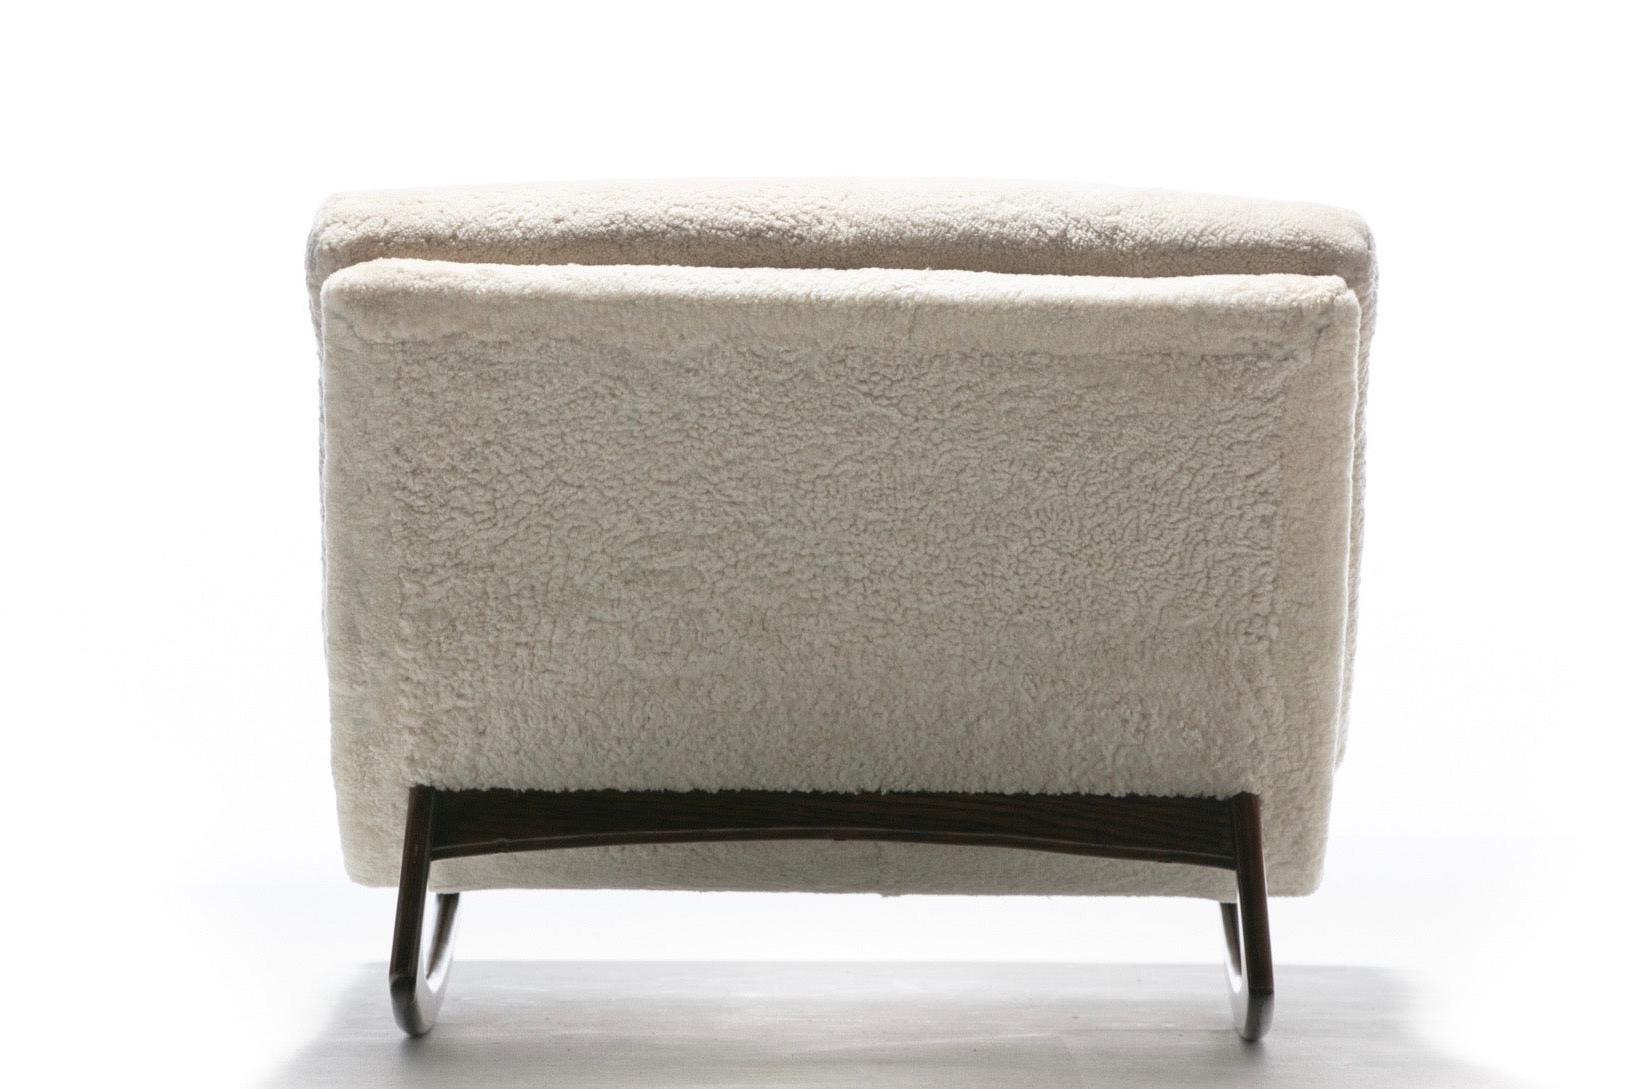 Hide Adrian Pearsall Waive Chaise Rocker Lounge in Ivory Shearling with Walnut Legs